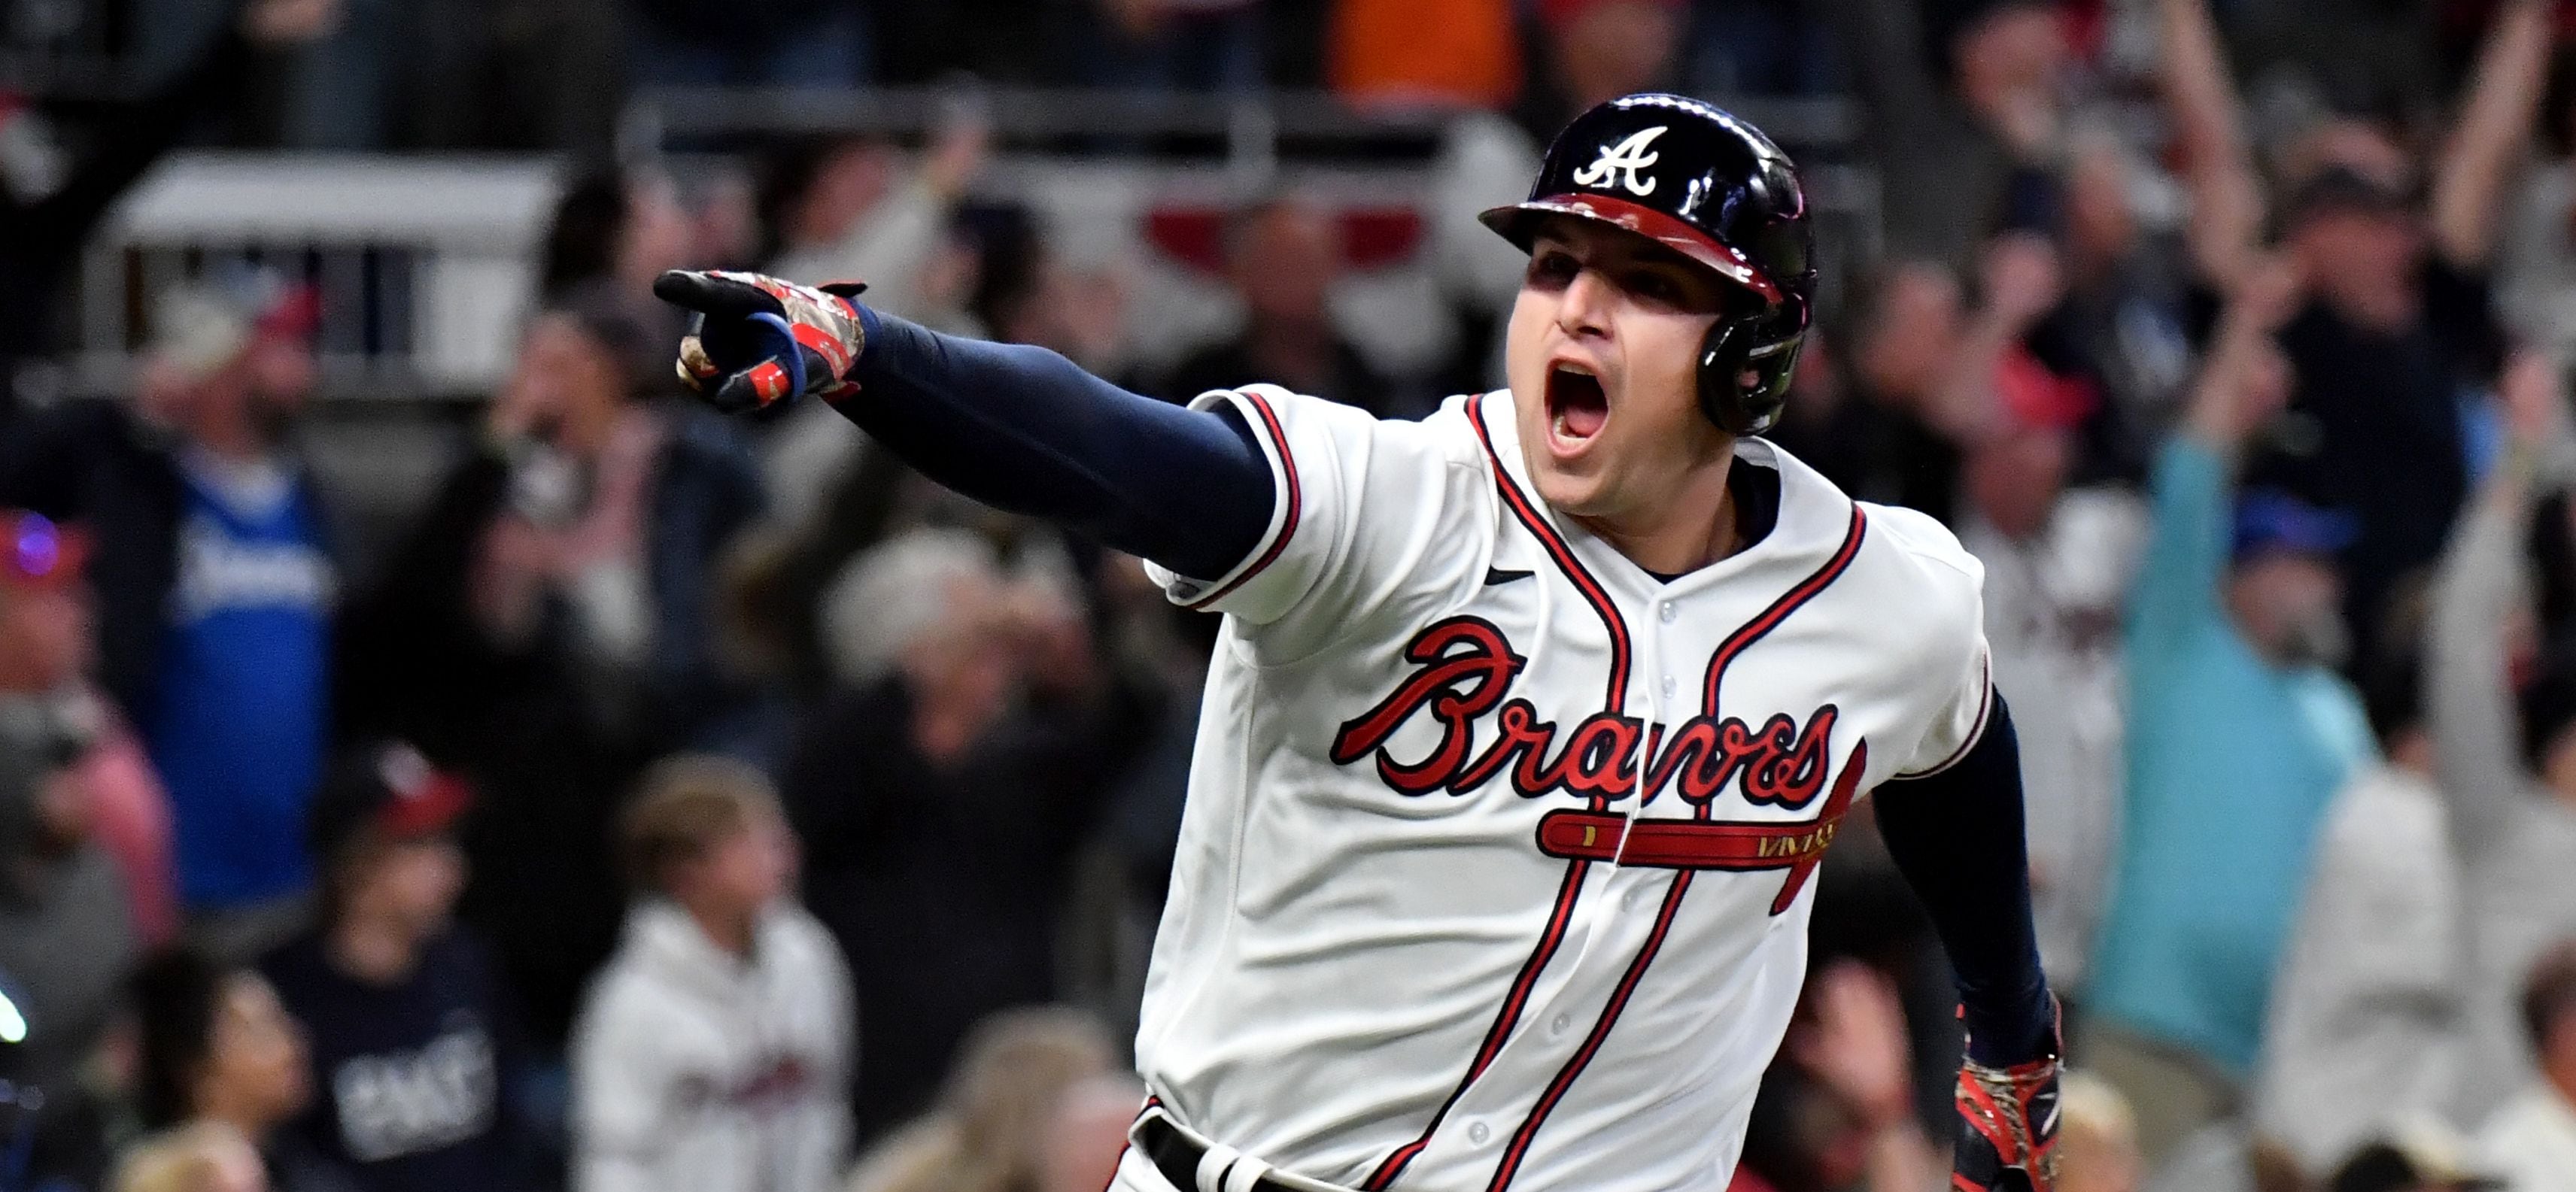 FOX Sports: MLB on X: THREE-PEAT! For the 3rd year in a row the Atlanta  @Braves are NL East Champions!  / X